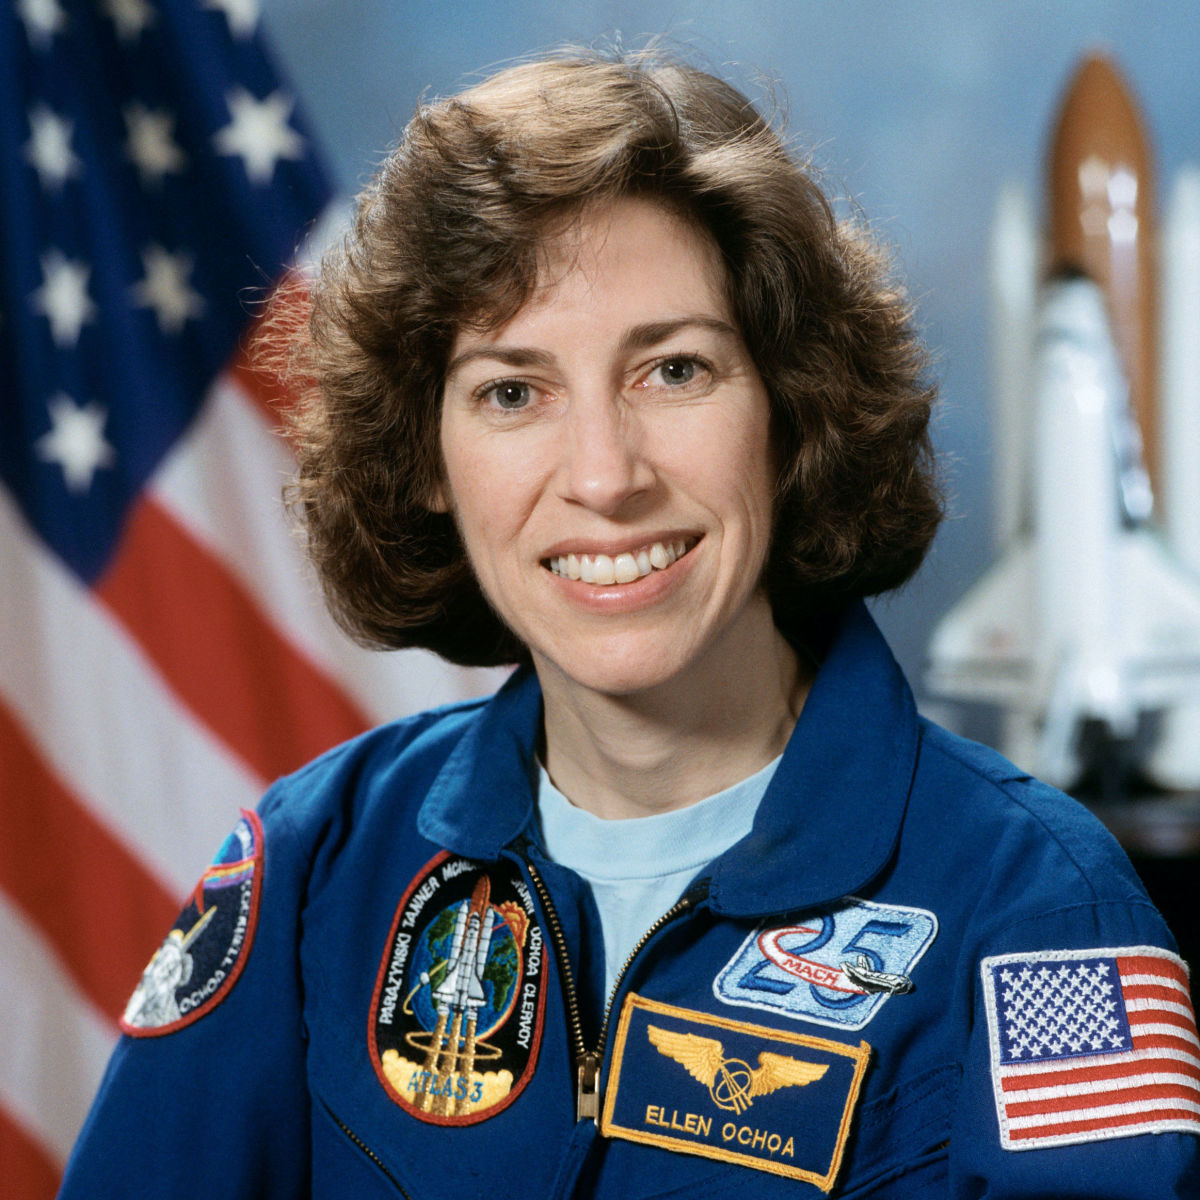 Scientist, engineer, and astronaut Ellen Ochoa was the first Hispanic woman in space. Explore how she made history aboard Discovery—and beyond: s.si.edu/36NAABL #HispanicHeritageMonth #SmithsonianHHM